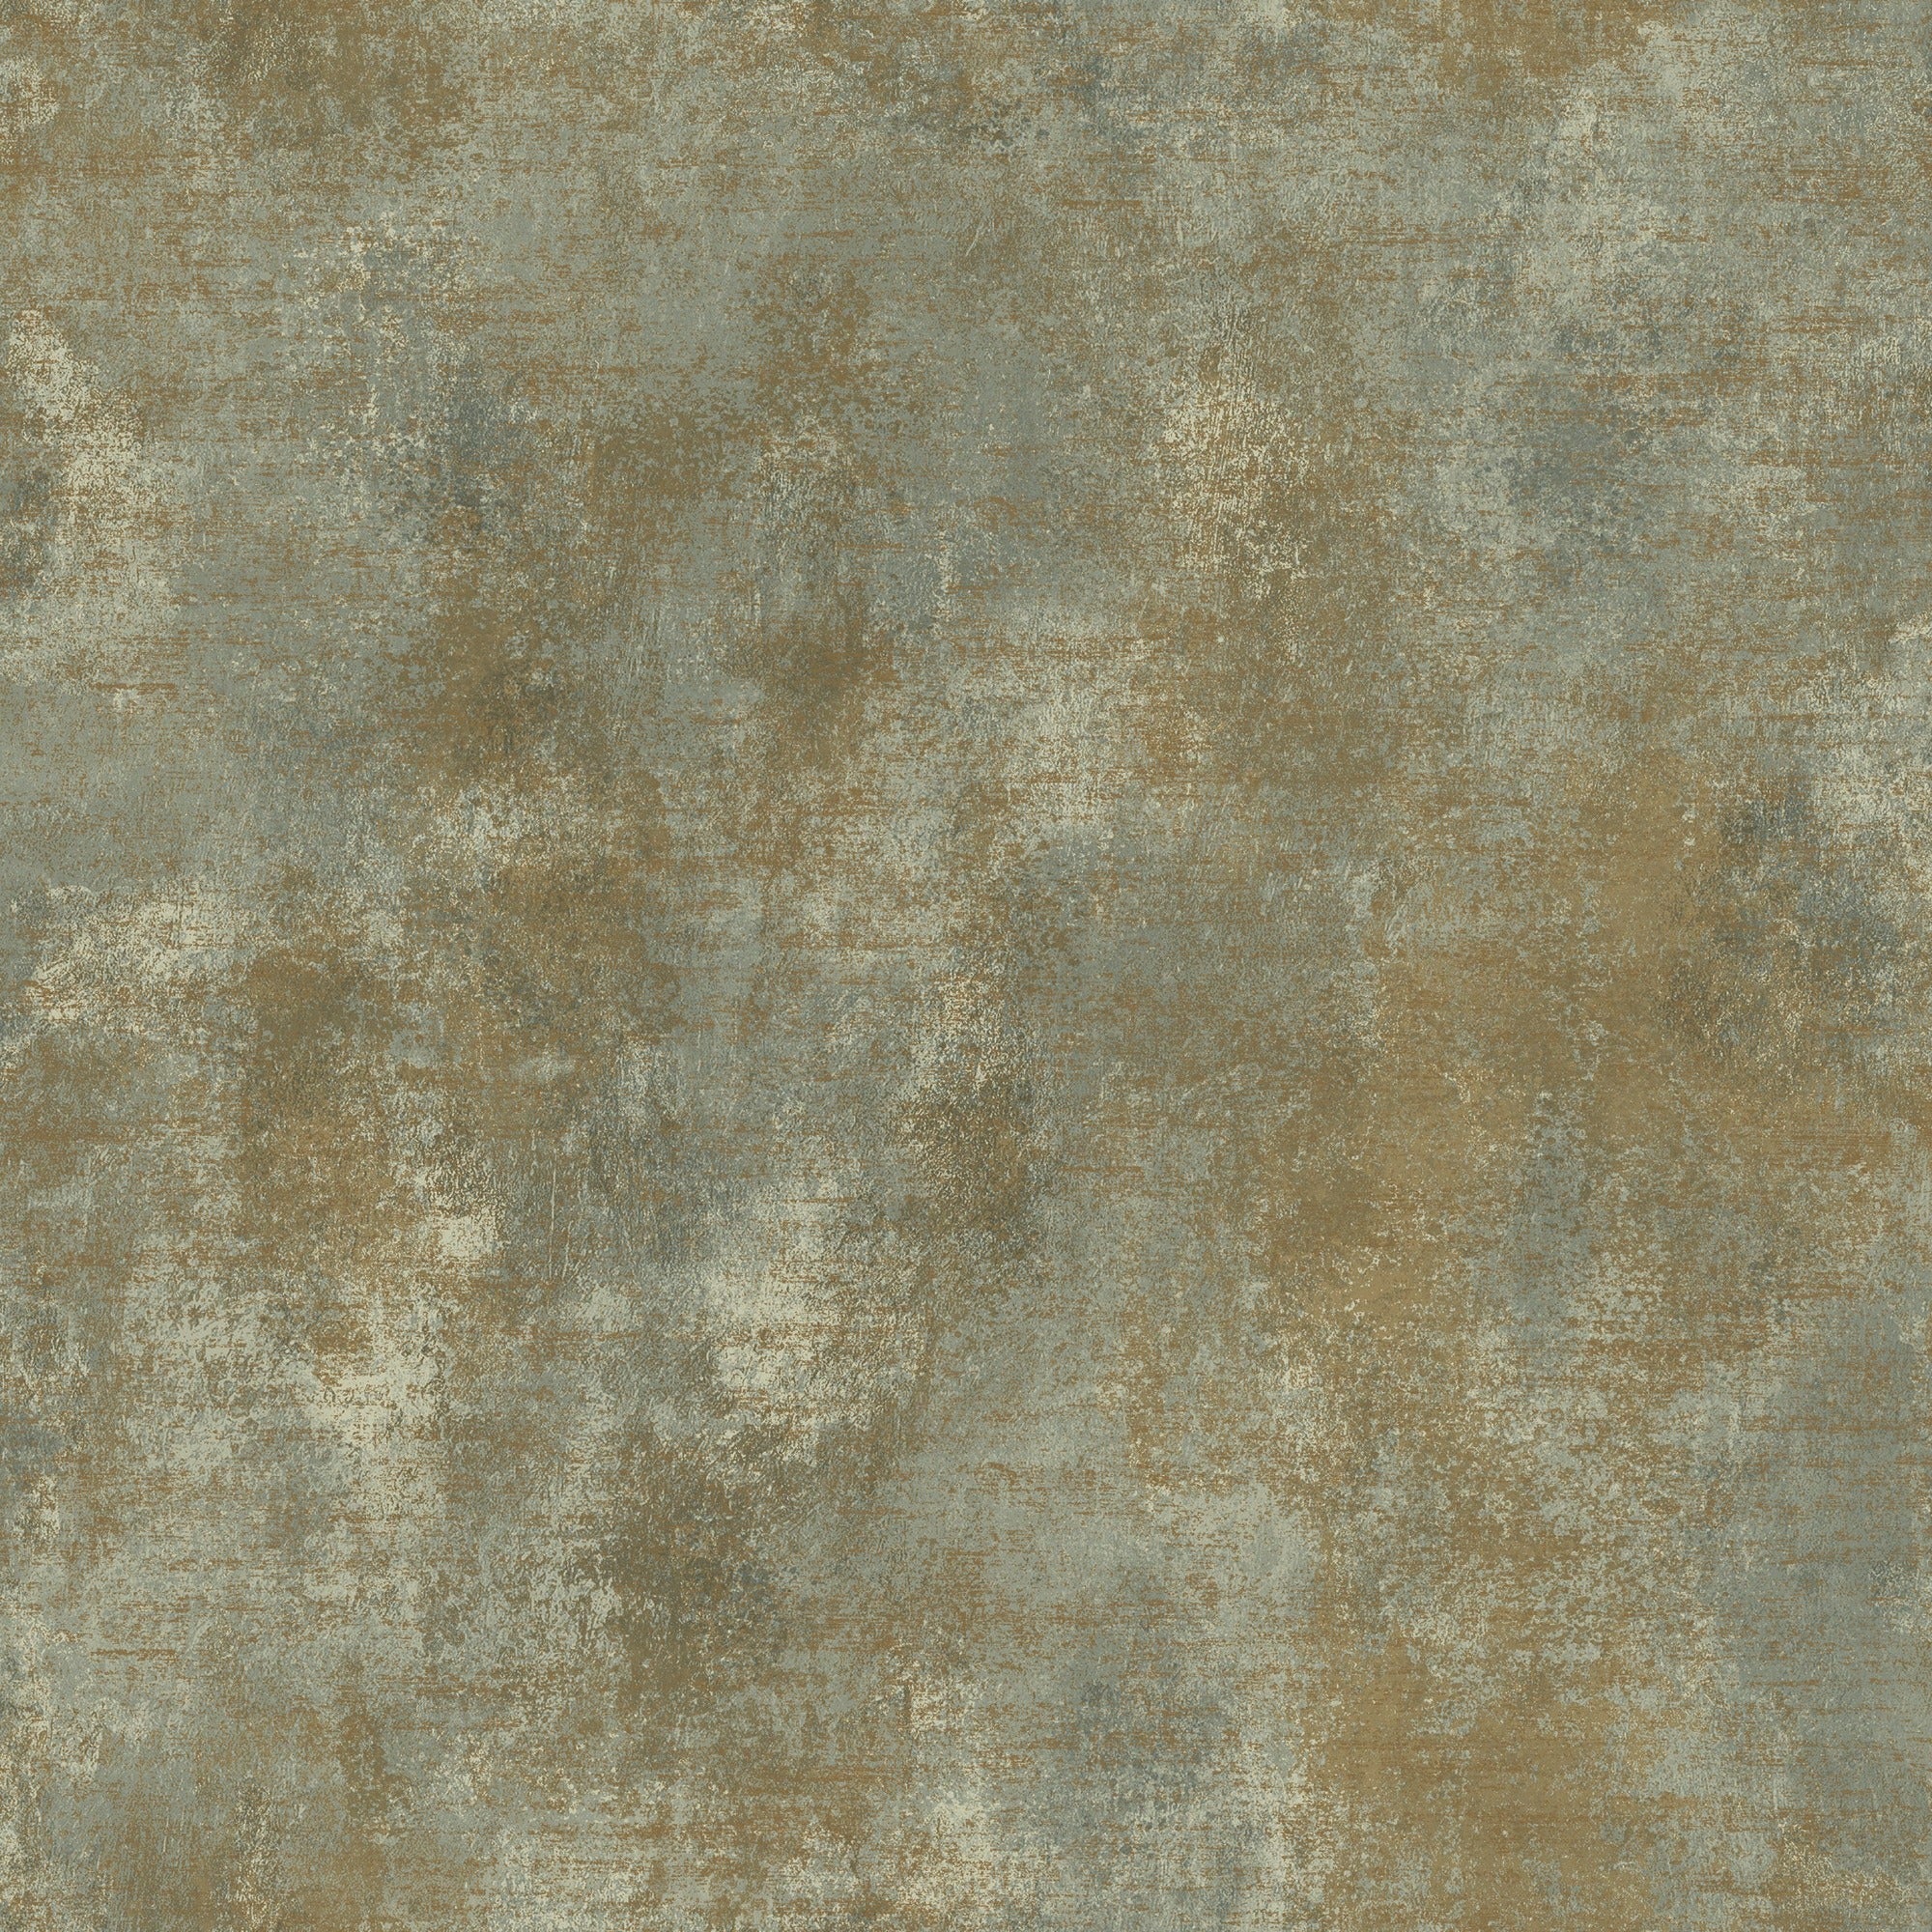 Textured Plain Sage Wallpaper | Grandeco Wallcoverings | A67904